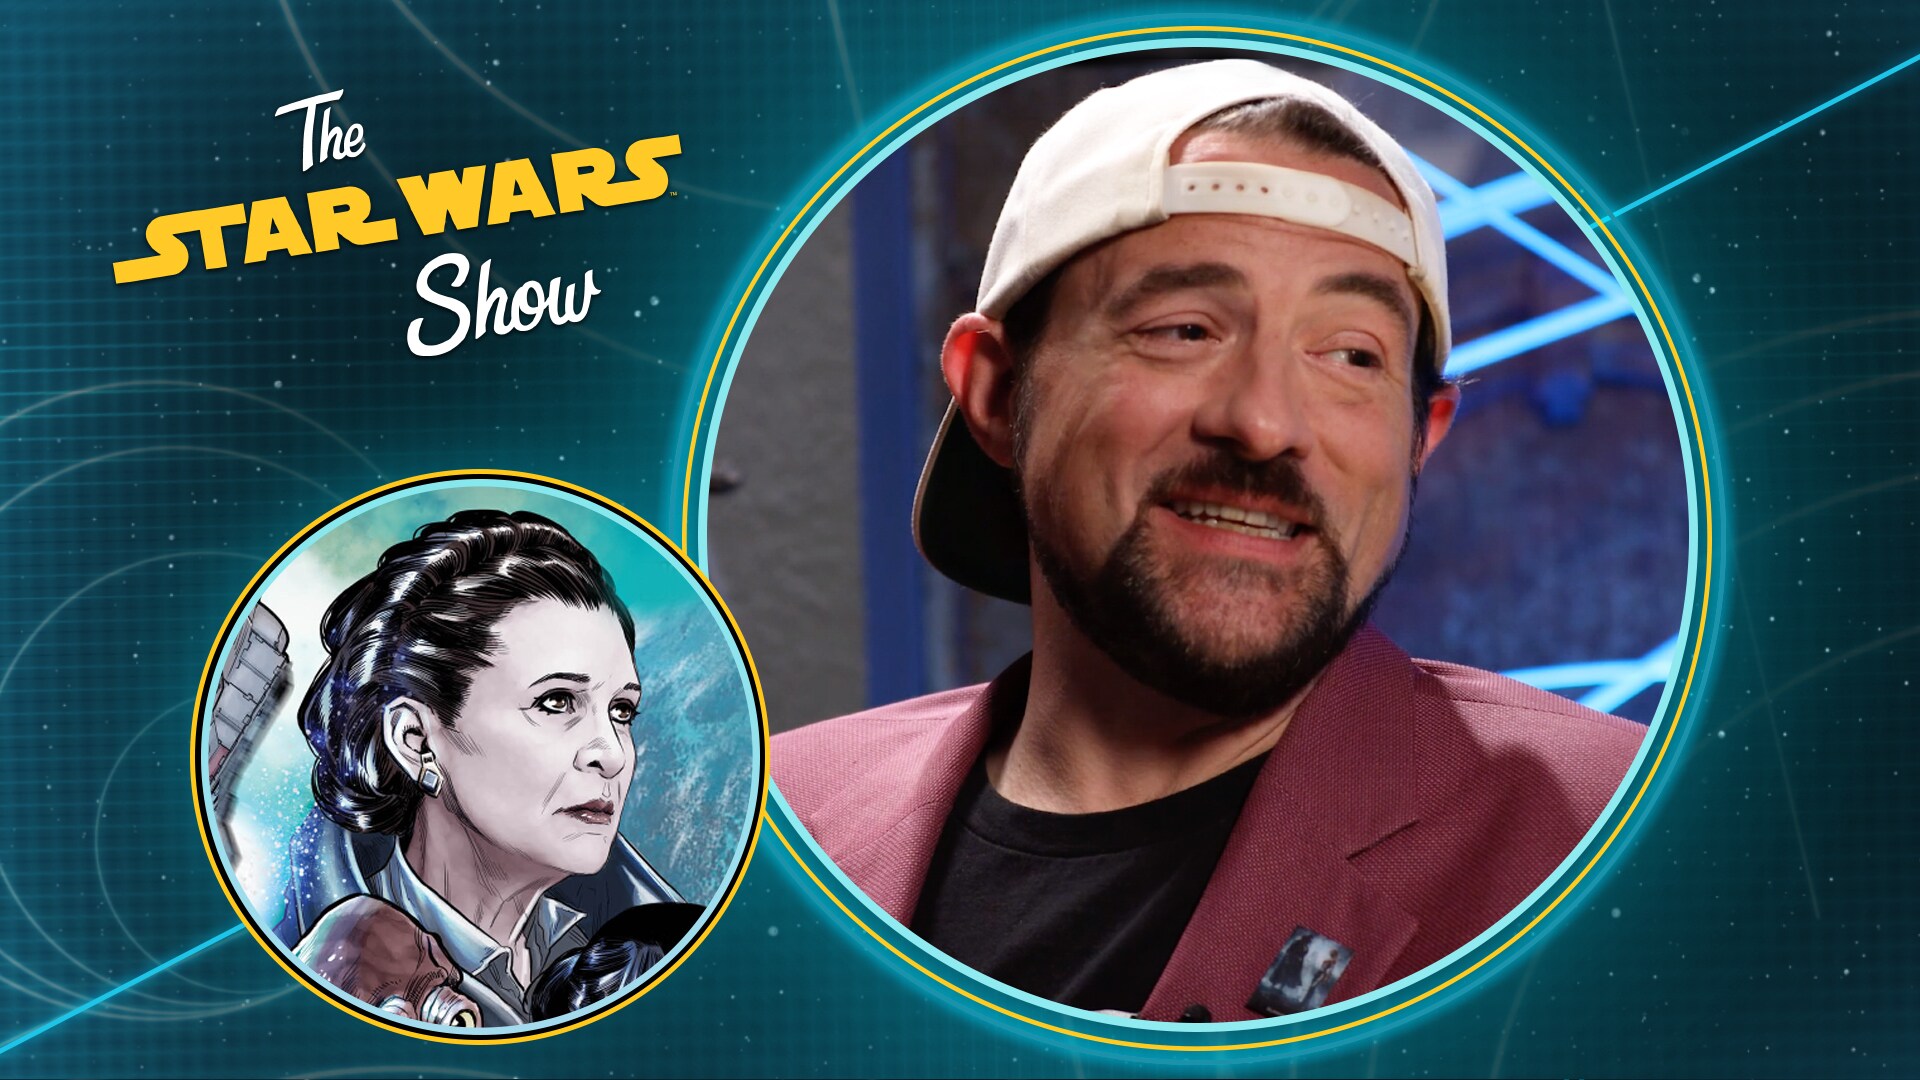 We Assure You, Kevin Smith Loves Star Wars